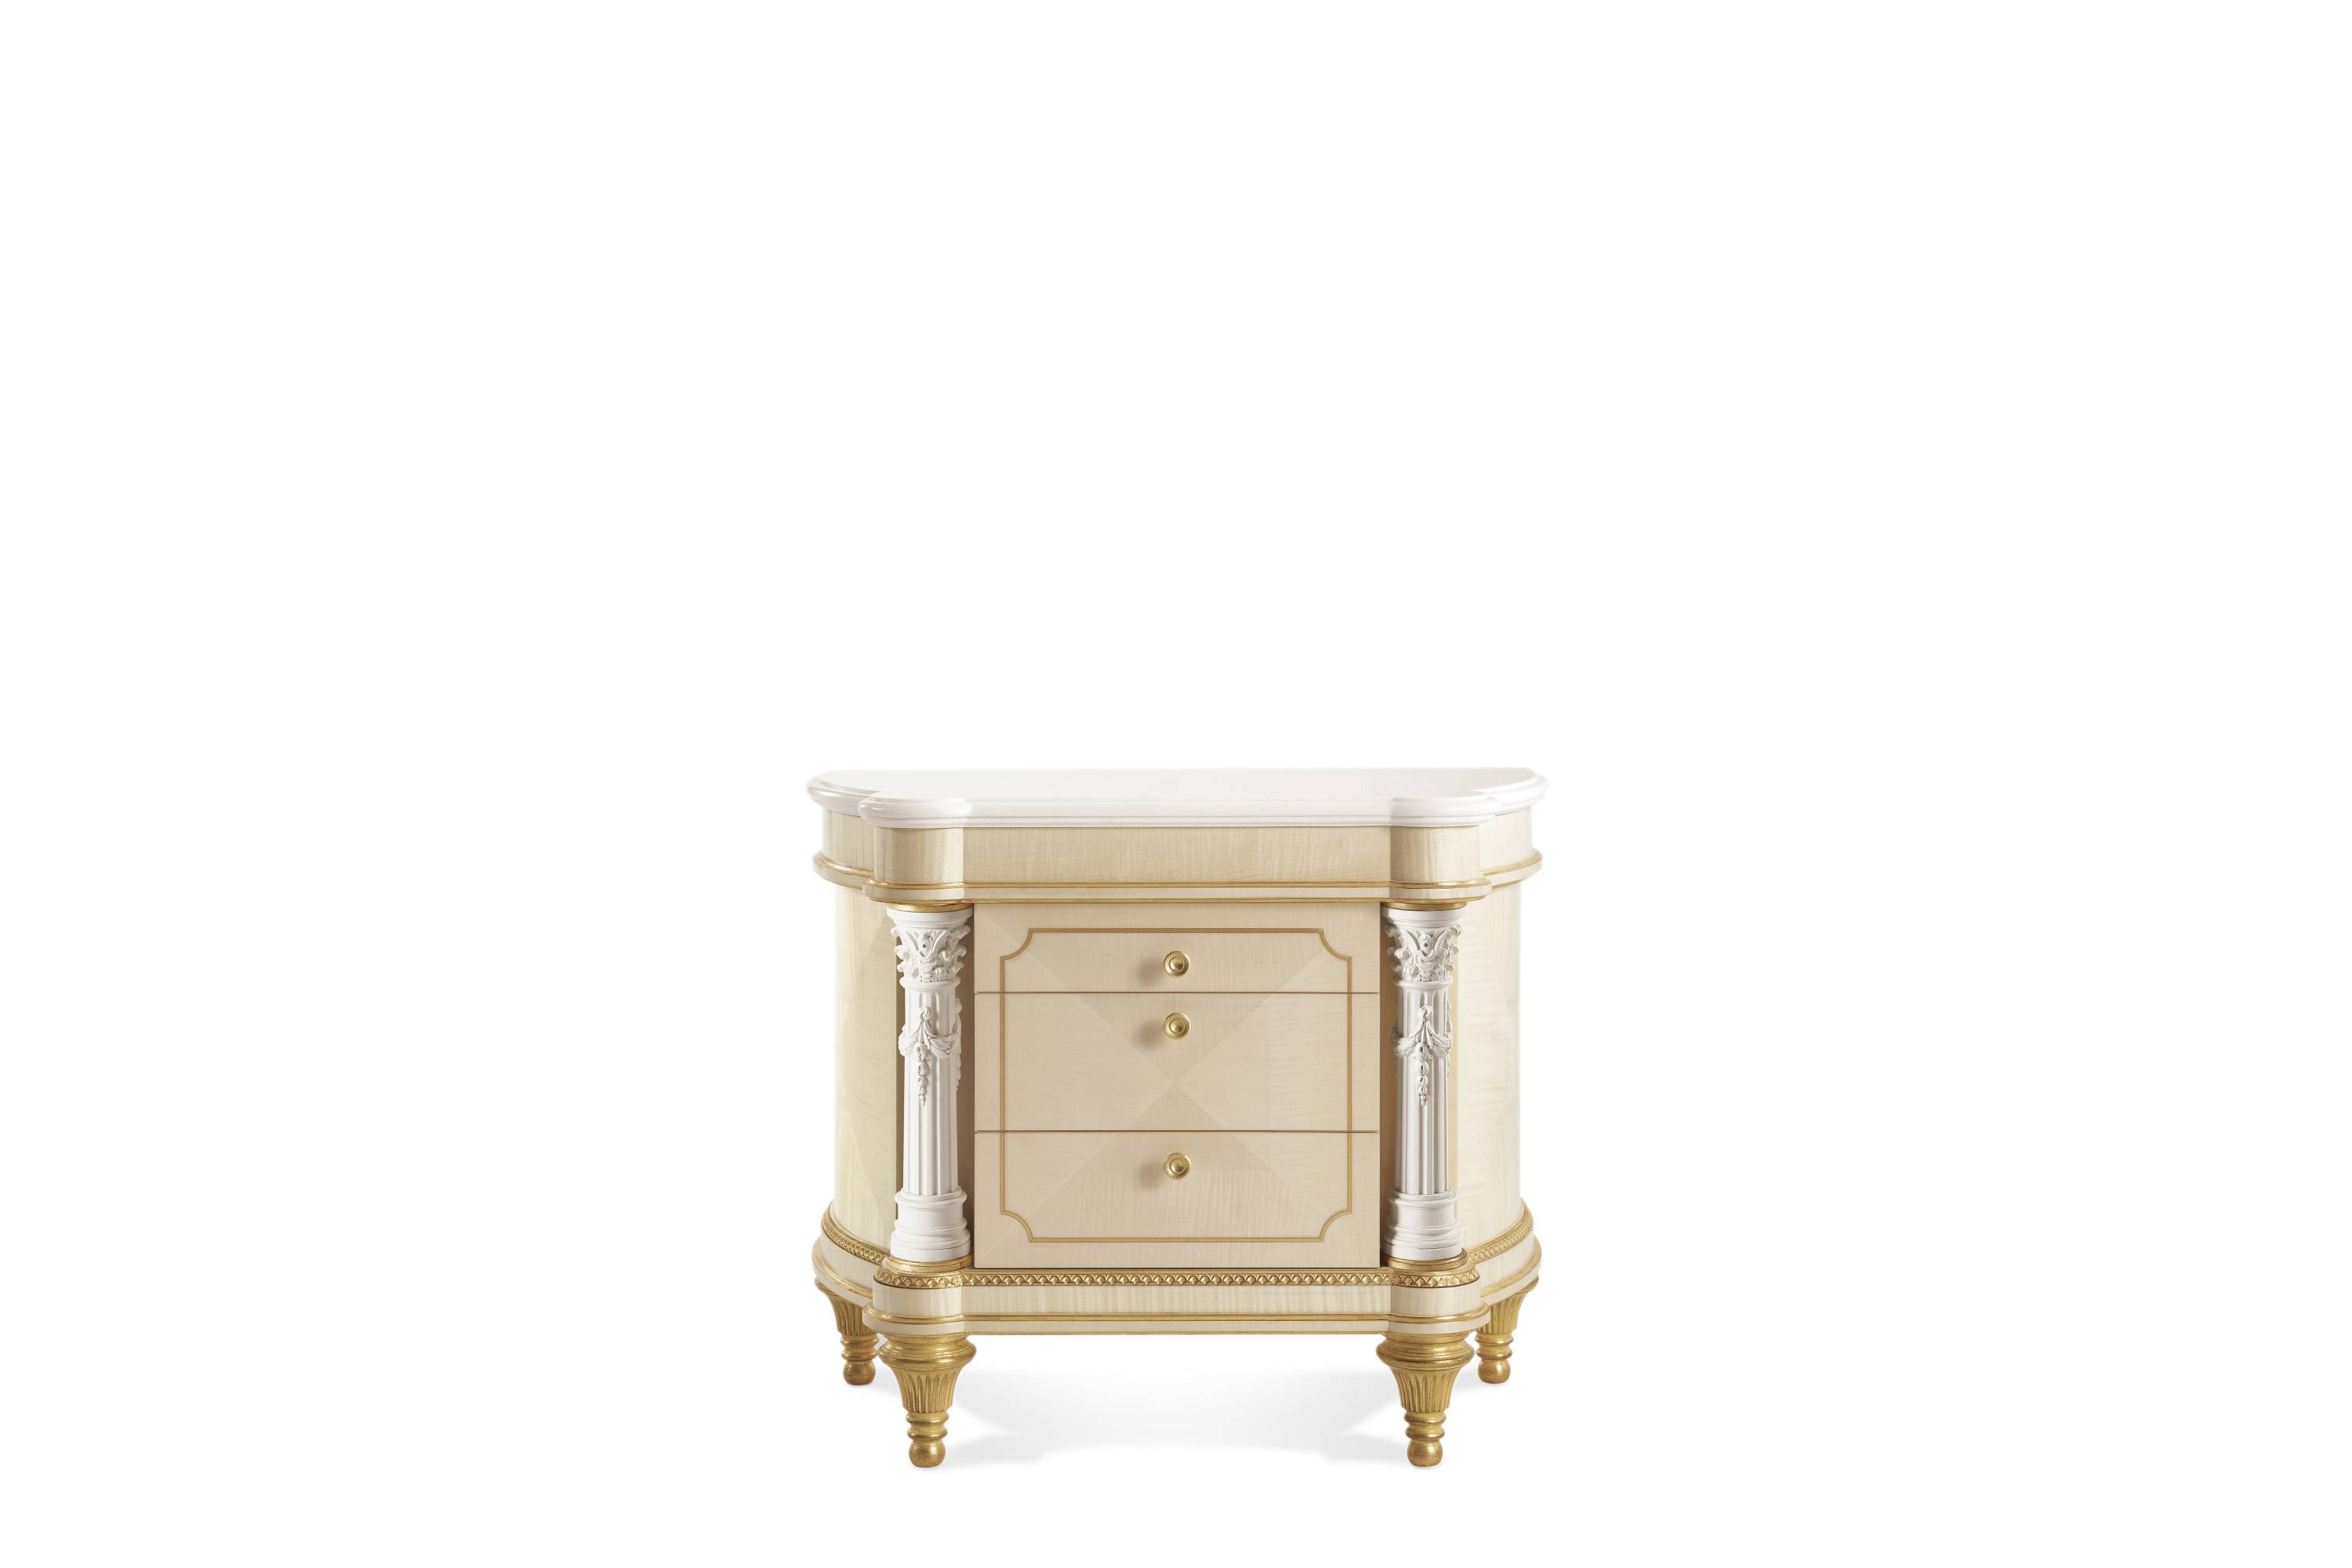 TOULOUSE night table – Transform your space with sophisticated Made in Italy classic night storage units.